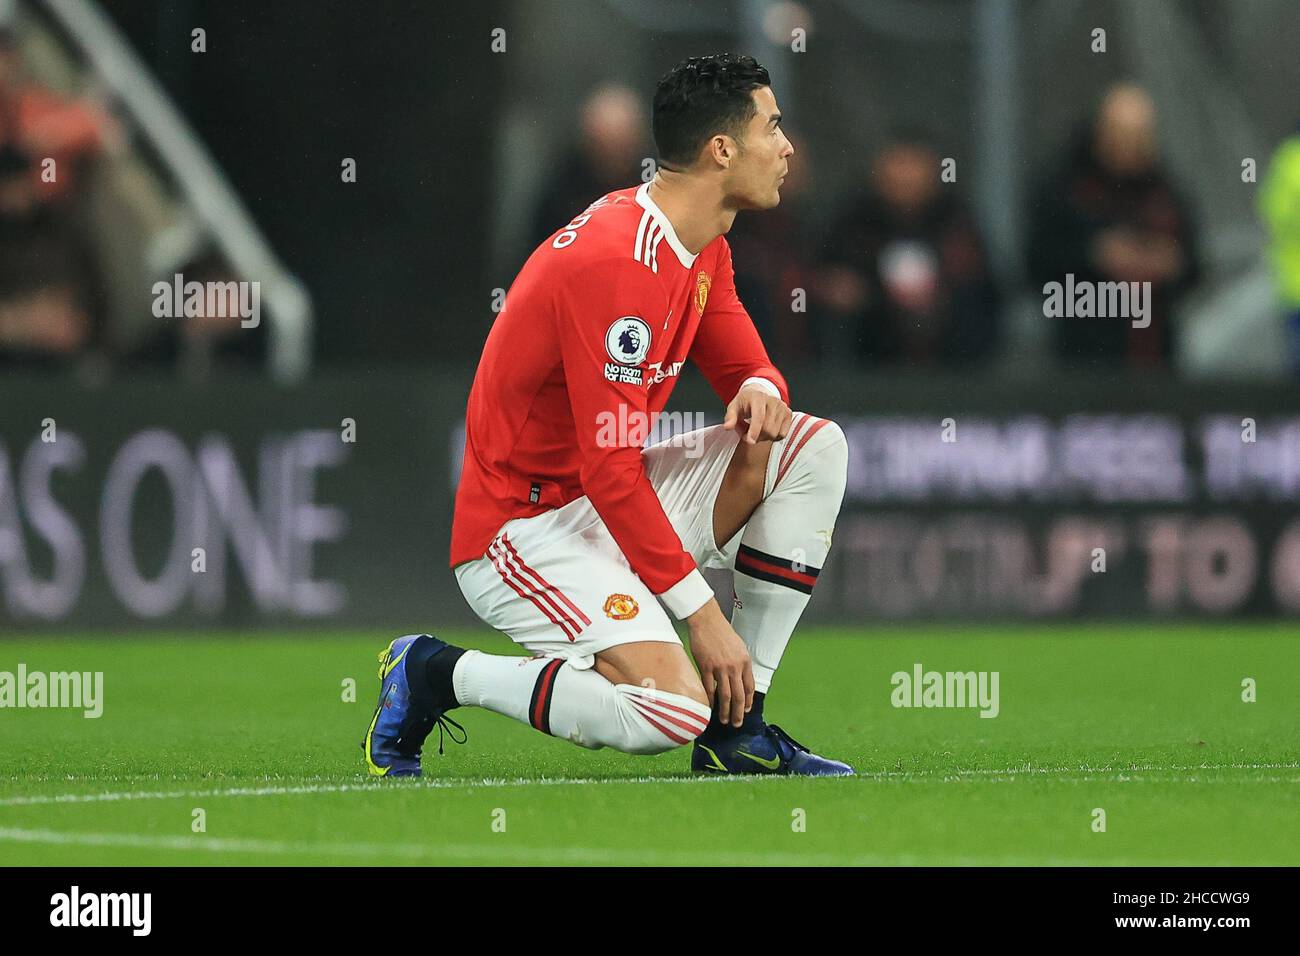 Cristiano Ronaldo #7 of Manchester United takes the knee at the start of the game in, on 12/27/2021. (Photo by Mark Cosgrove/News Images/Sipa USA) Credit: Sipa USA/Alamy Live News Stock Photo